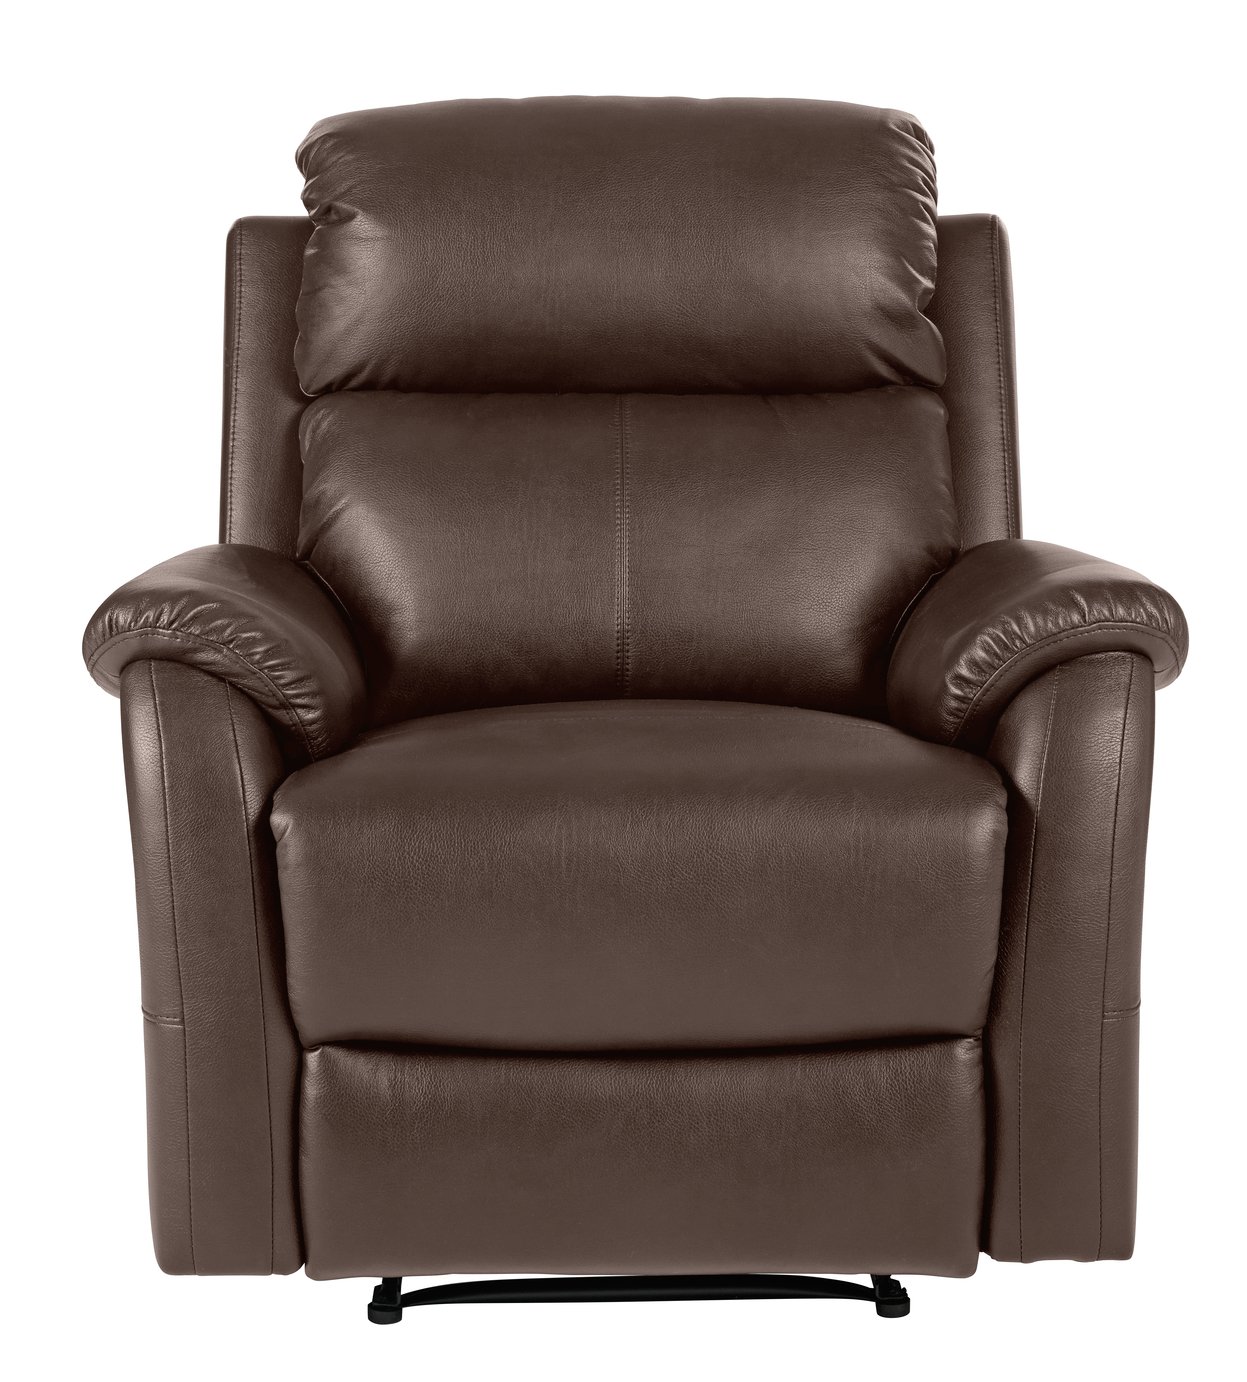 Argos Home Tyler Leather Manual Recliner Chair - Chocolate